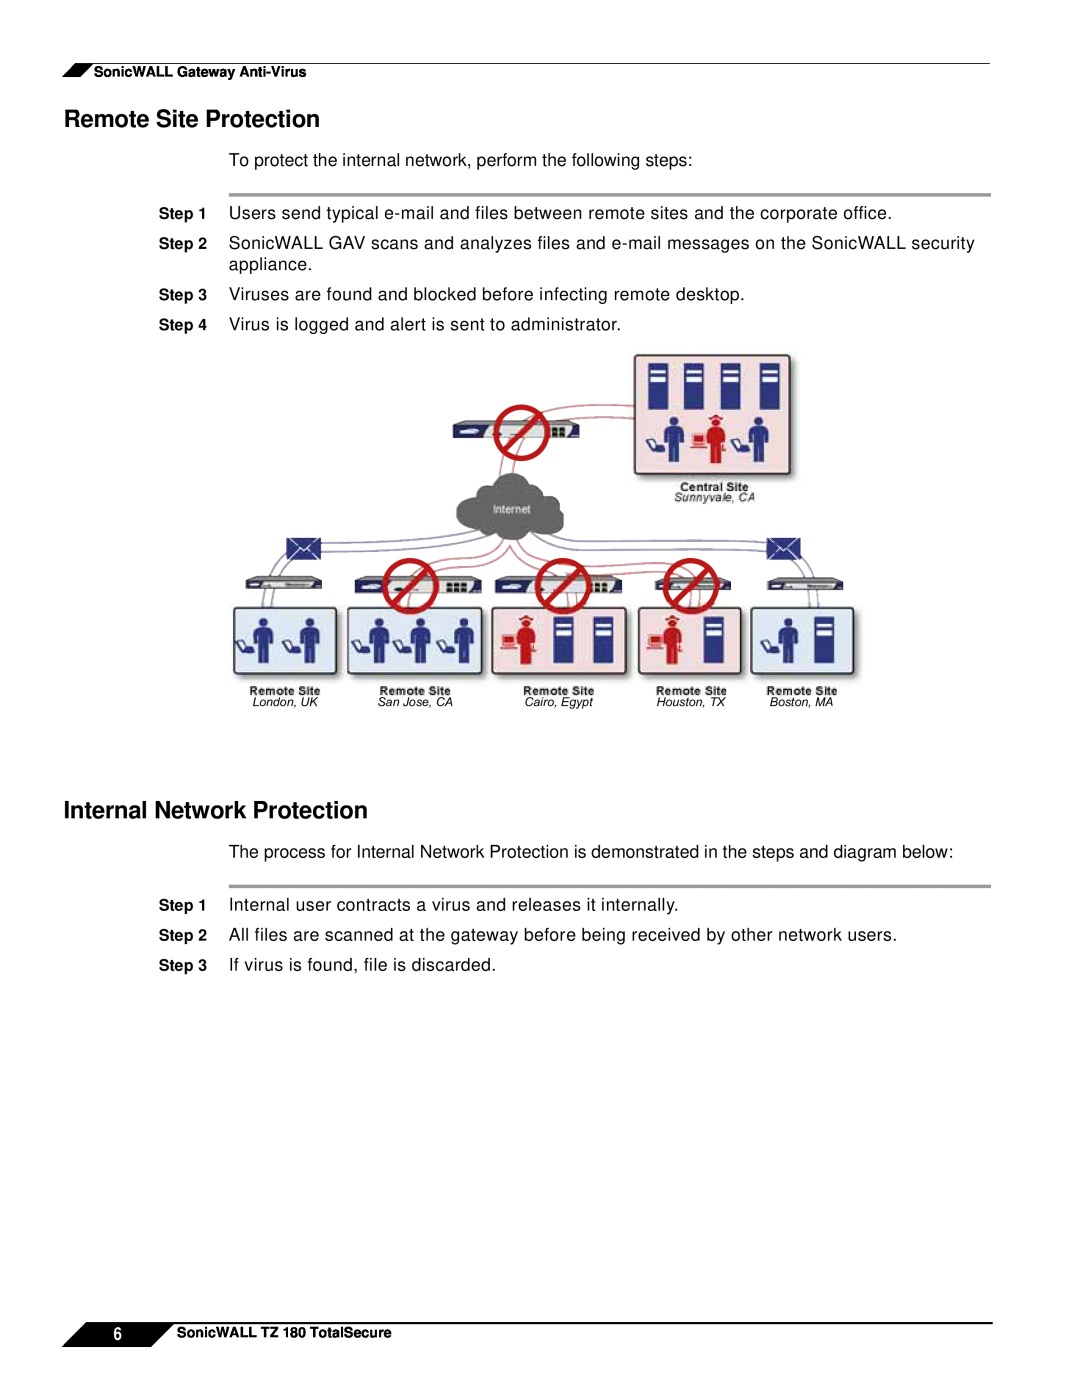 SonicWALL TZ 180 manual Remote Site Protection, Internal Network Protection, SonicWALL Gateway Anti-Virus 